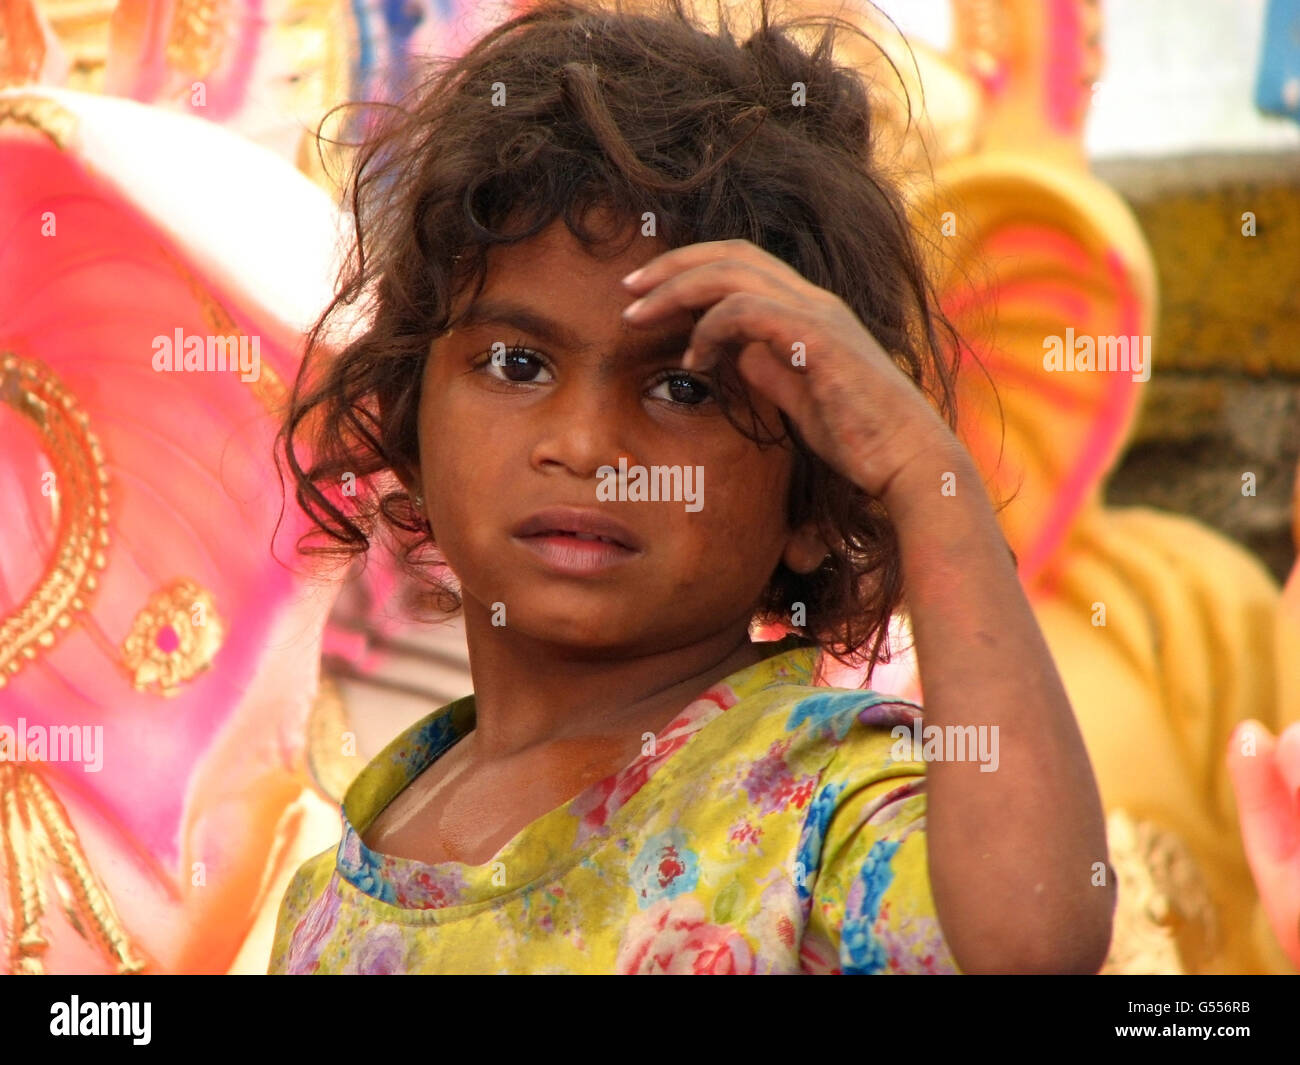 A poor Indian girl Stock Photo - Alamy